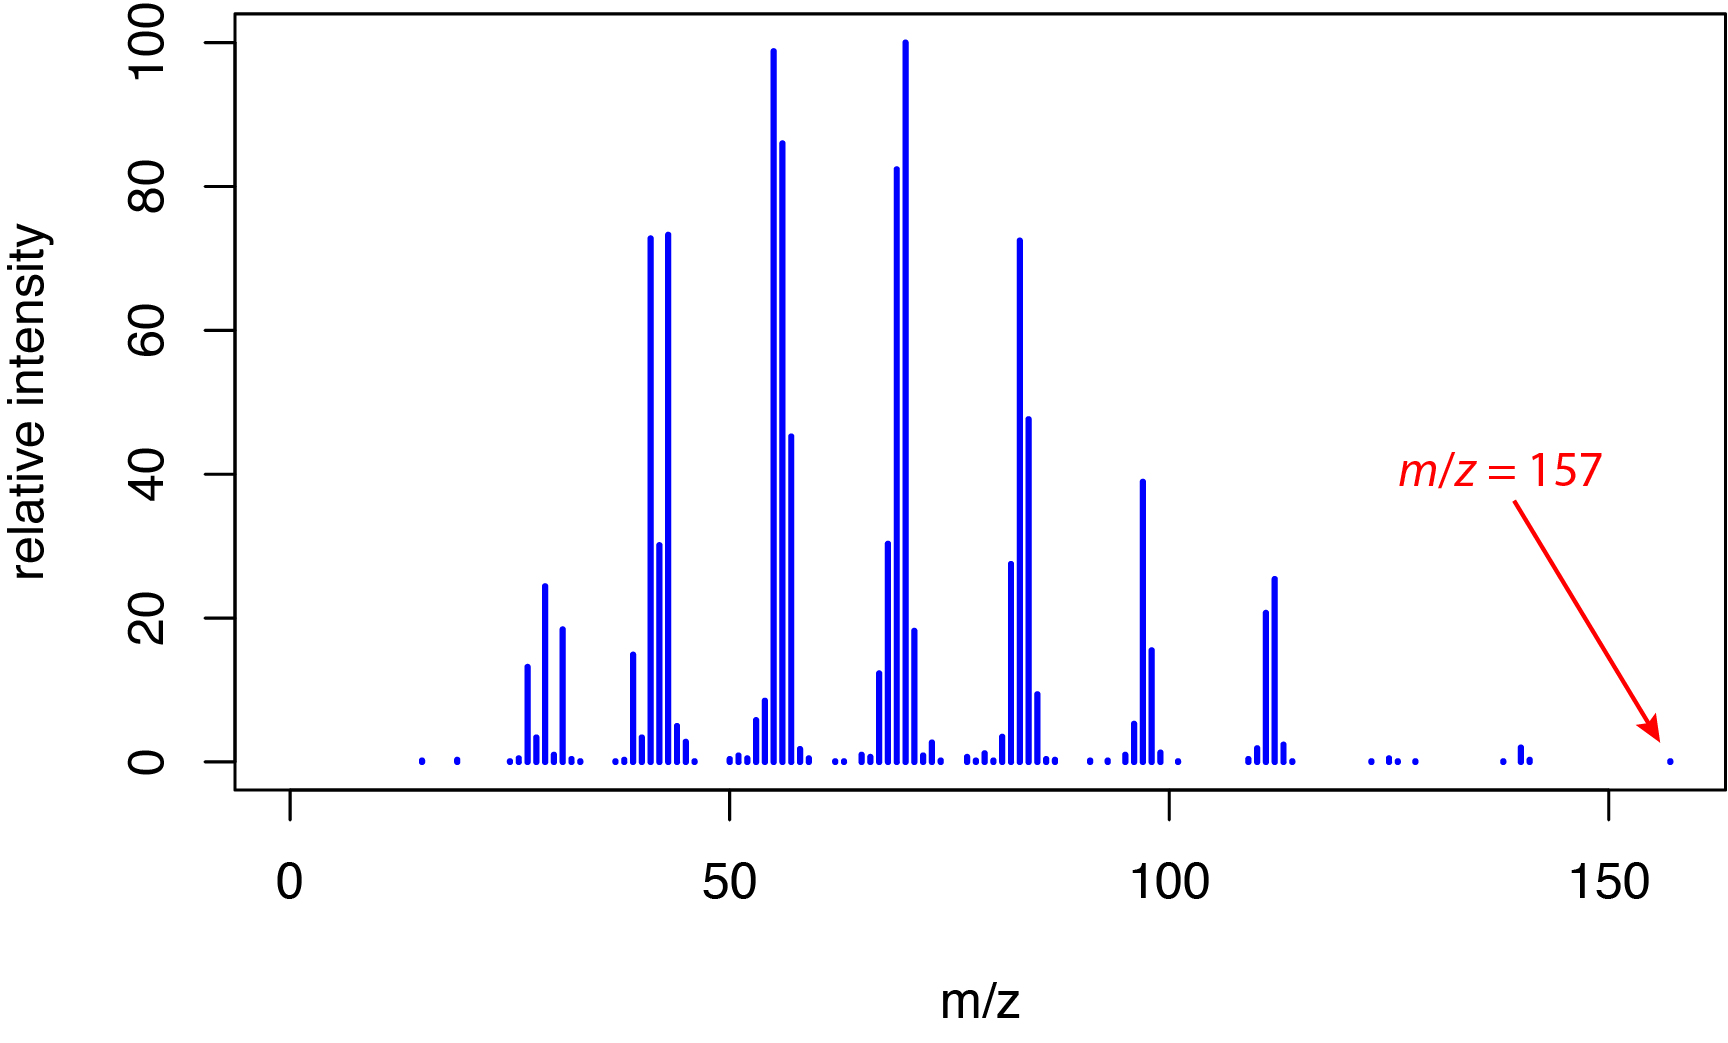 Mass spectrum for 1-decanol using electron ionization. The peak furthest to the right (m/z = 157 amu) is one atomic mass unit less than the expected peak for the molecular ion, which does not appear in the spectrum. 